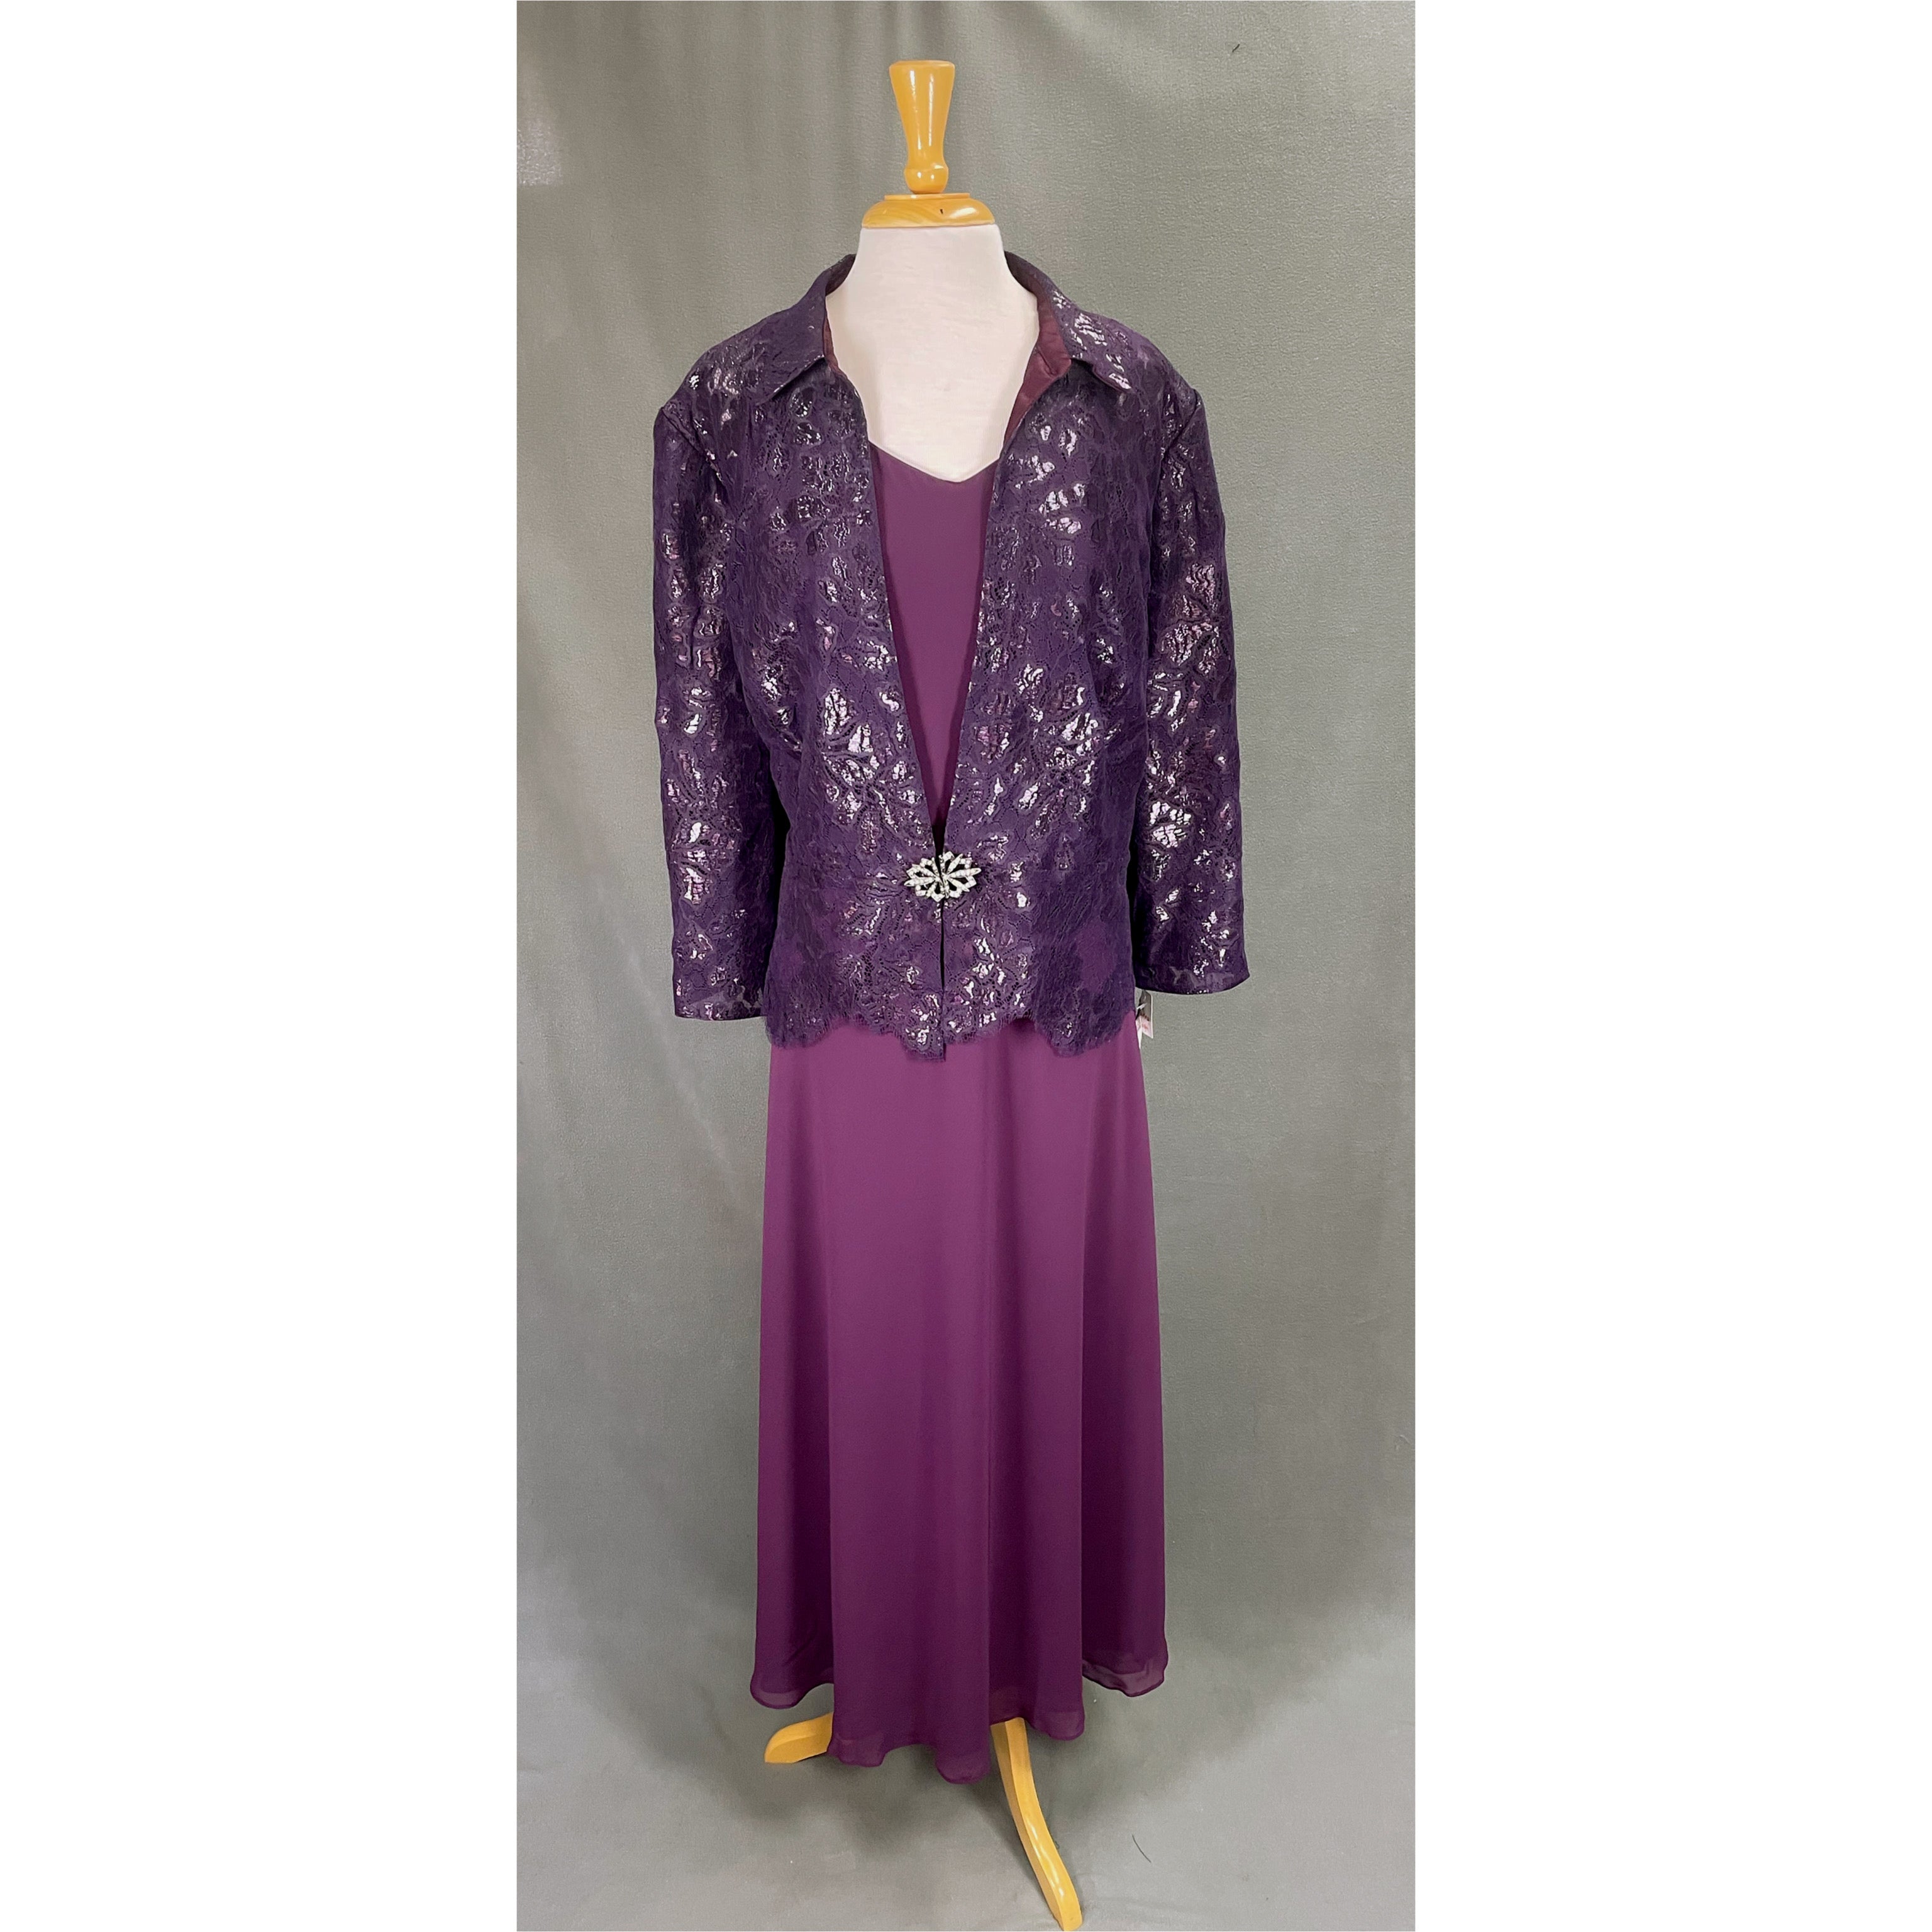 Ursula plum lace dress, size 22W, NEW WITH TAGS!